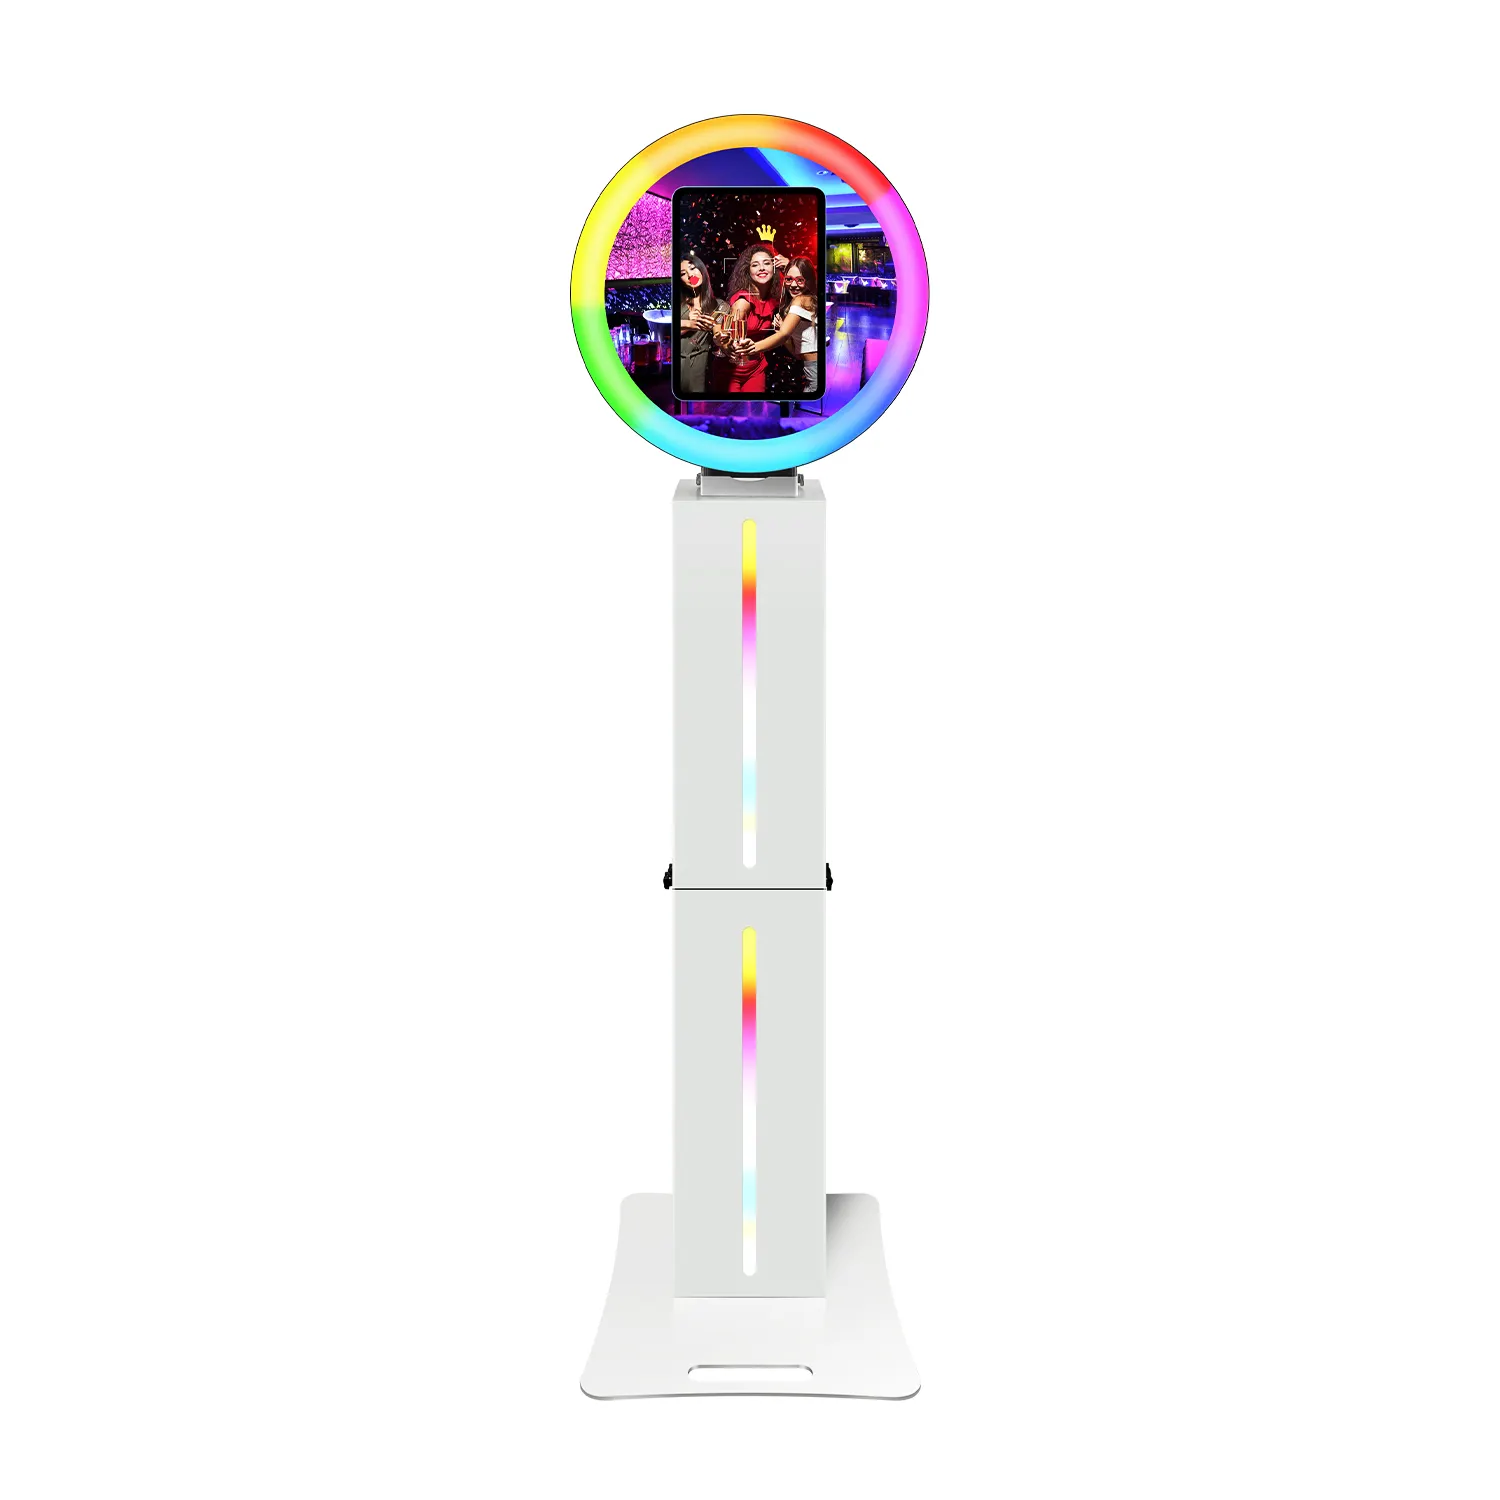 2024 New Selfie Kiosk Ring Light Ipad Booth Led Ipad Photo Booth Stand Portable Ipad PhotoBooth Shell With Remote Control